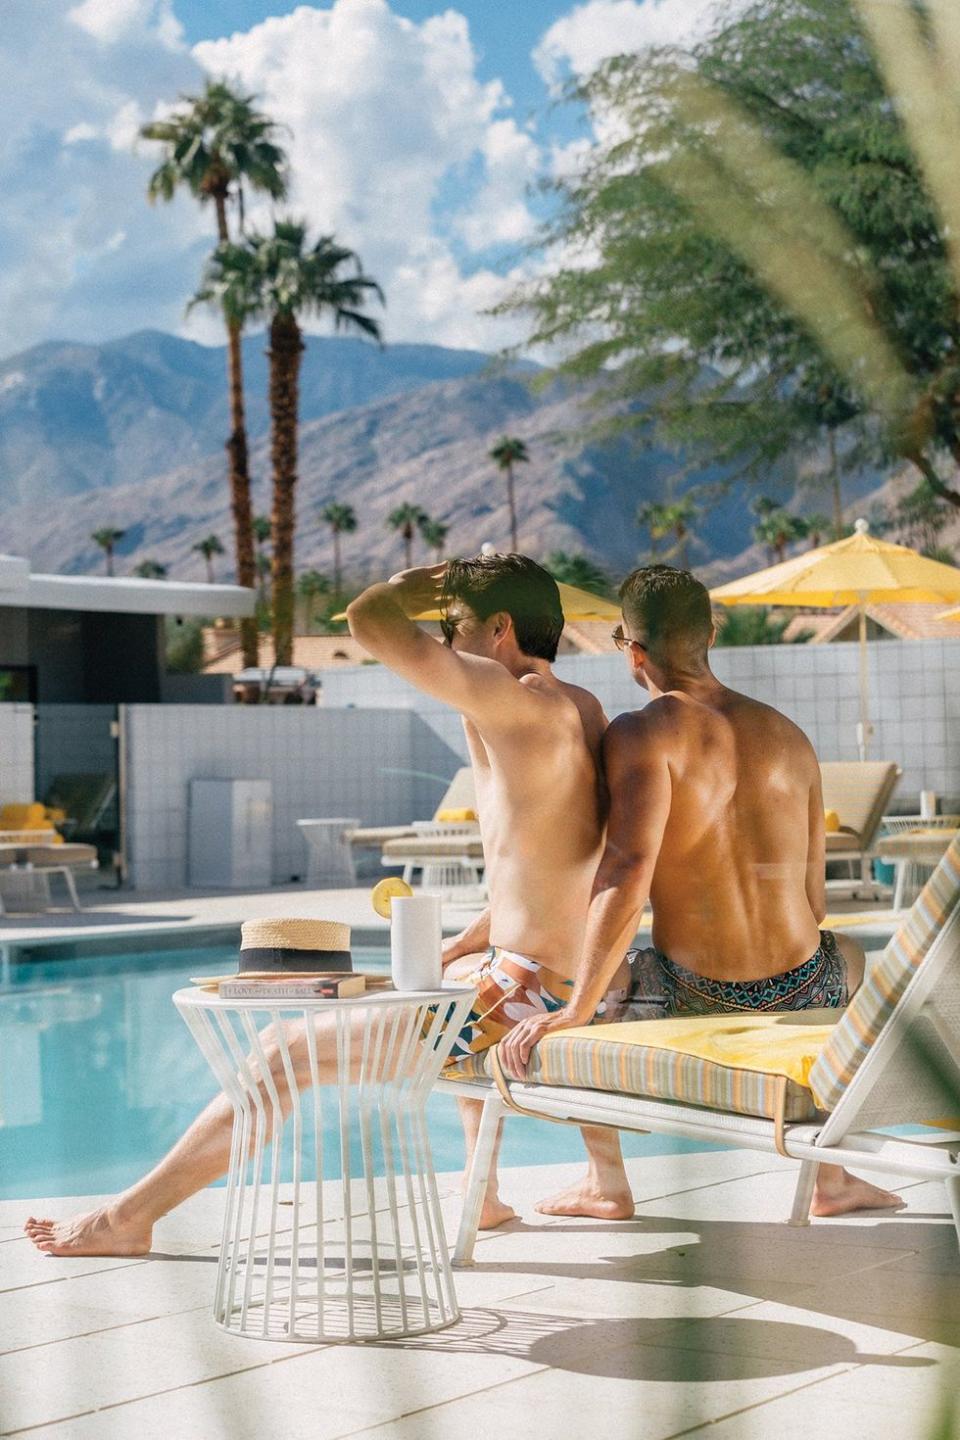 A gay couple lounge poolside at the Twin Palms Resort, a gay men's clothing optional resort in Palm Springs